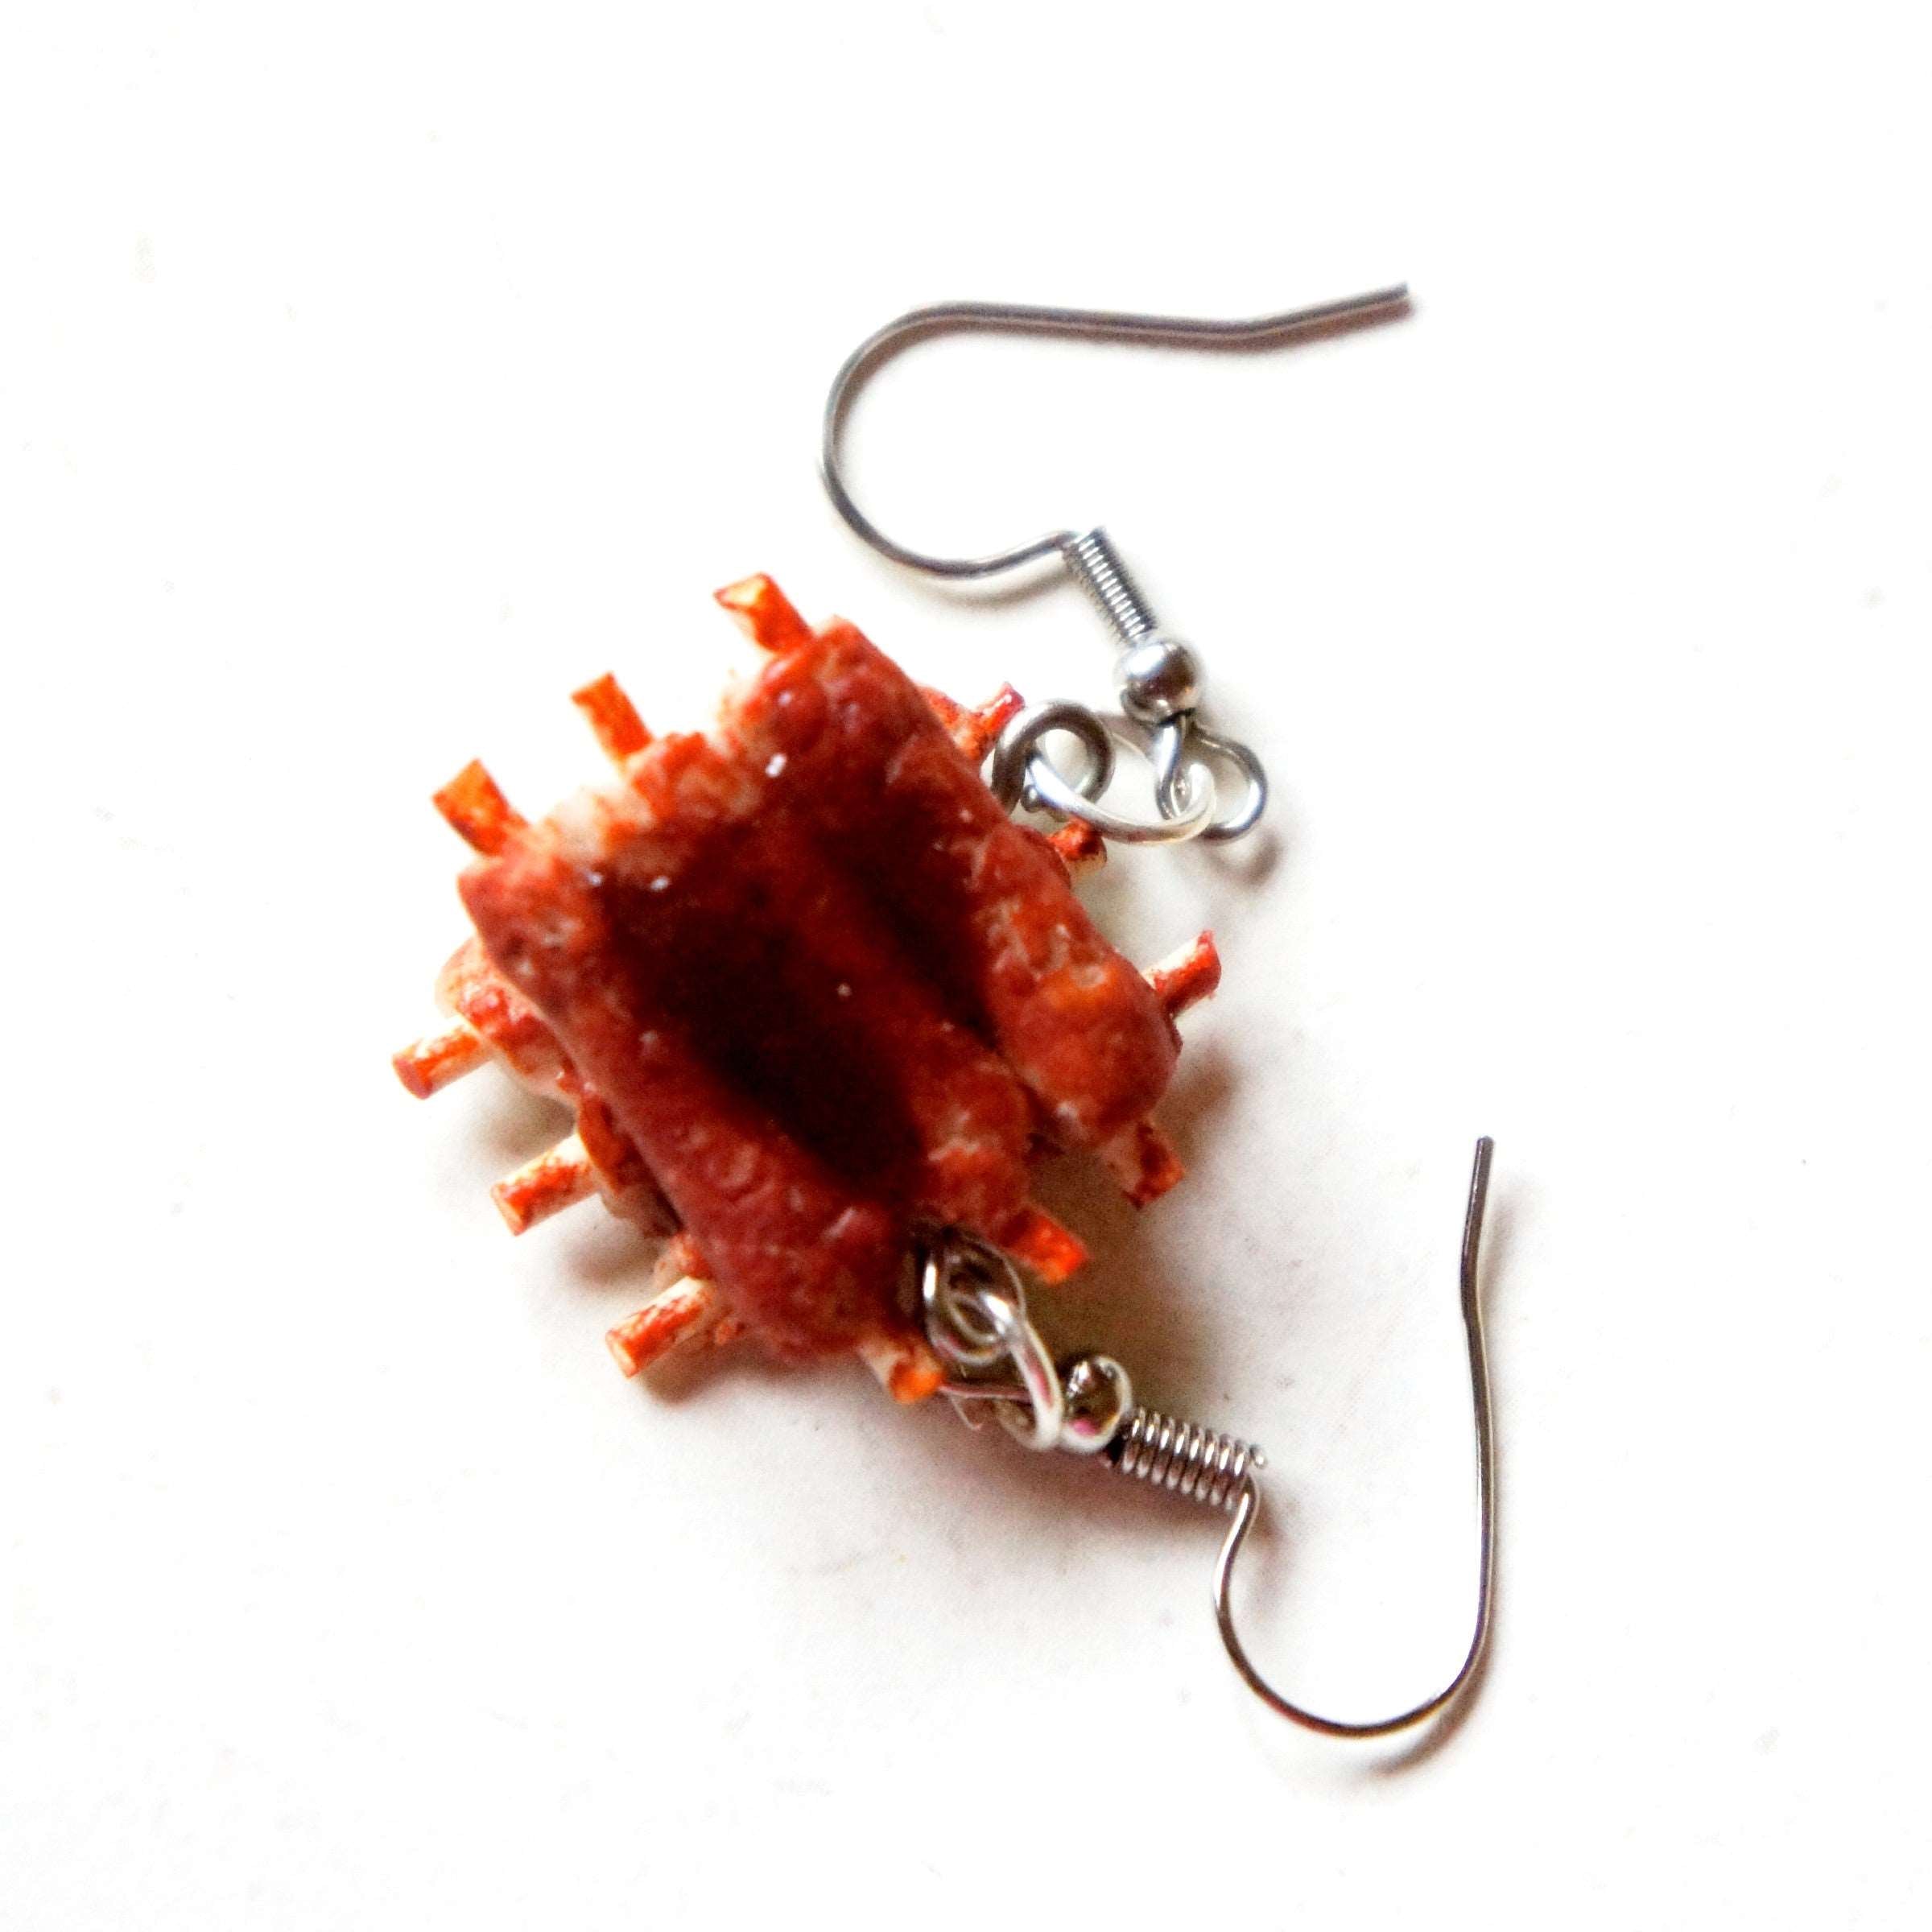 Barbeque Ribs Dangle Earrings - Jillicious charms and accessories